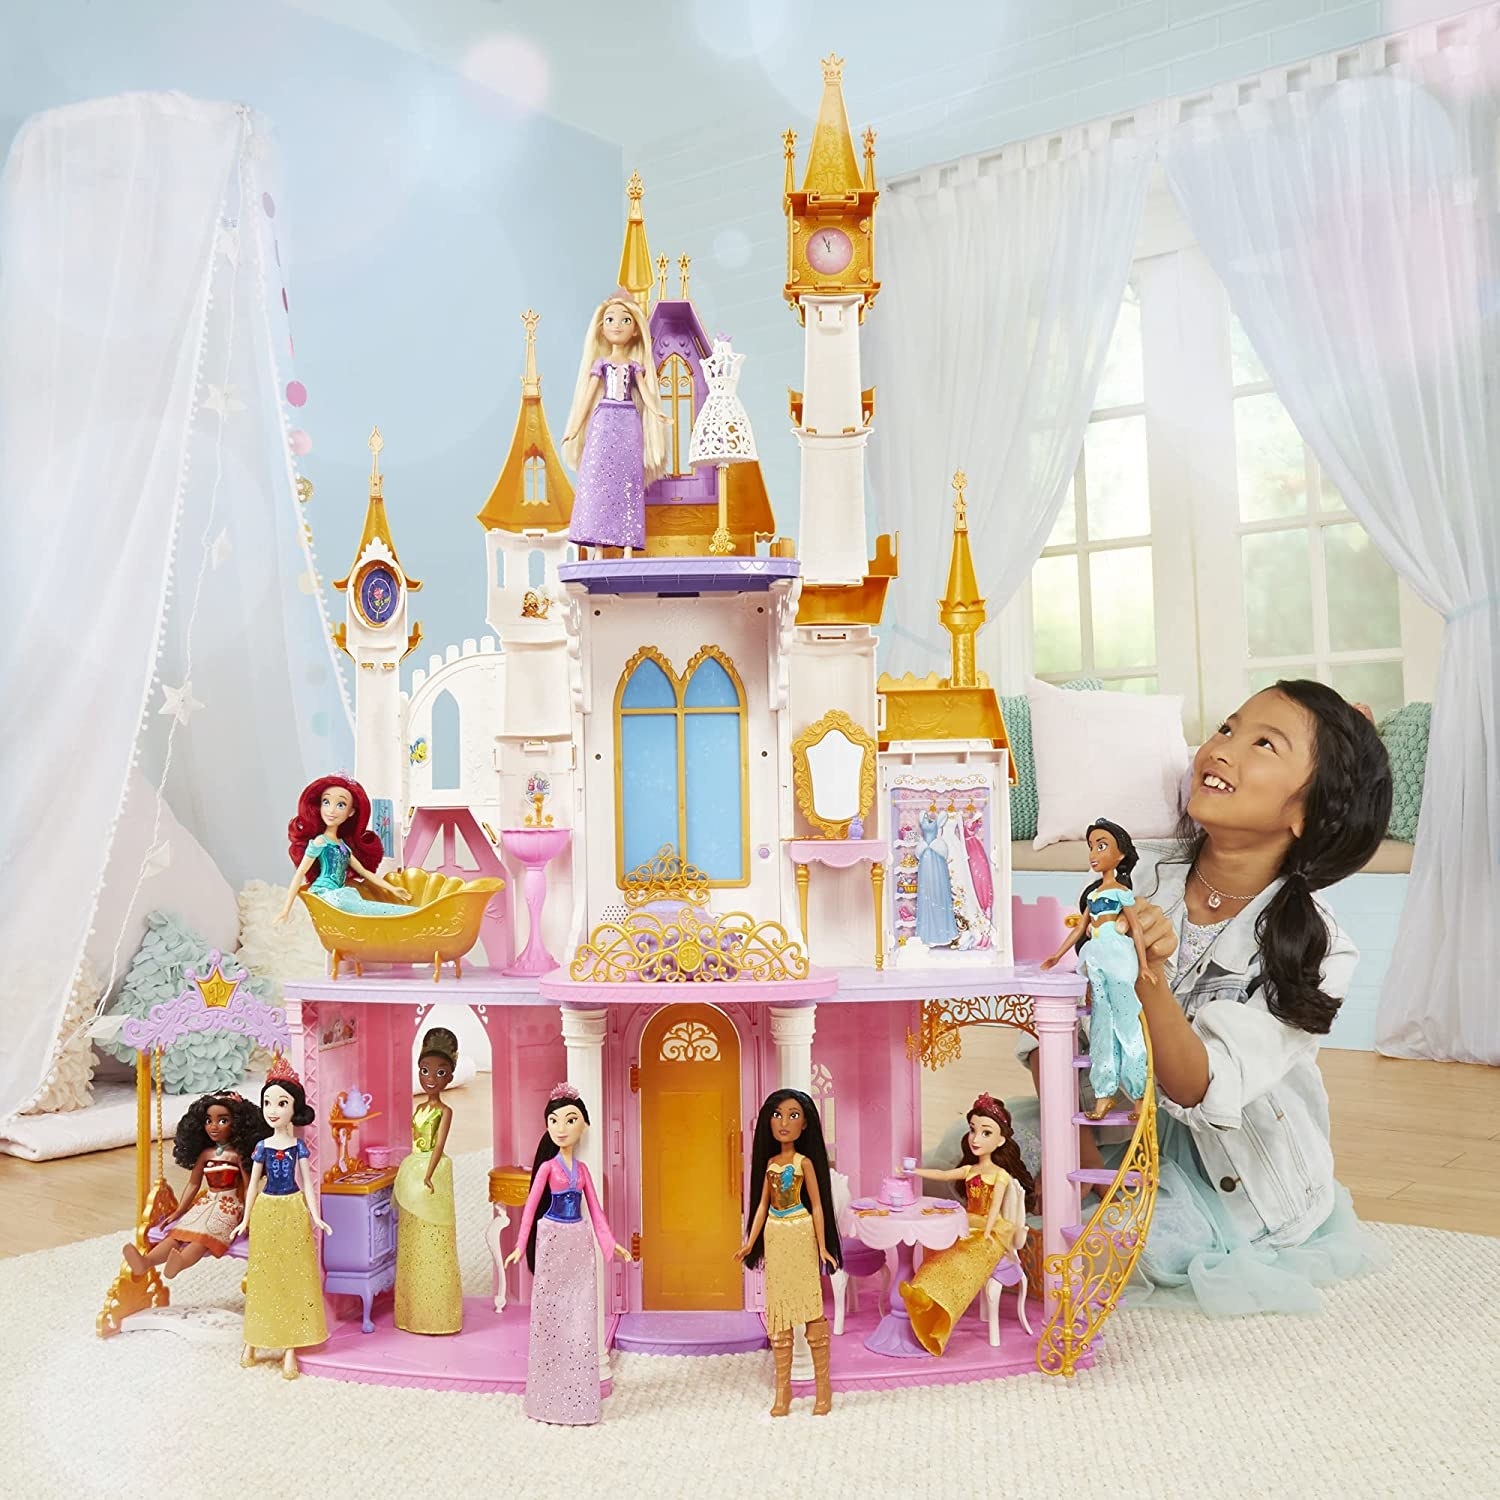 A person playing with Disney dolls in the house